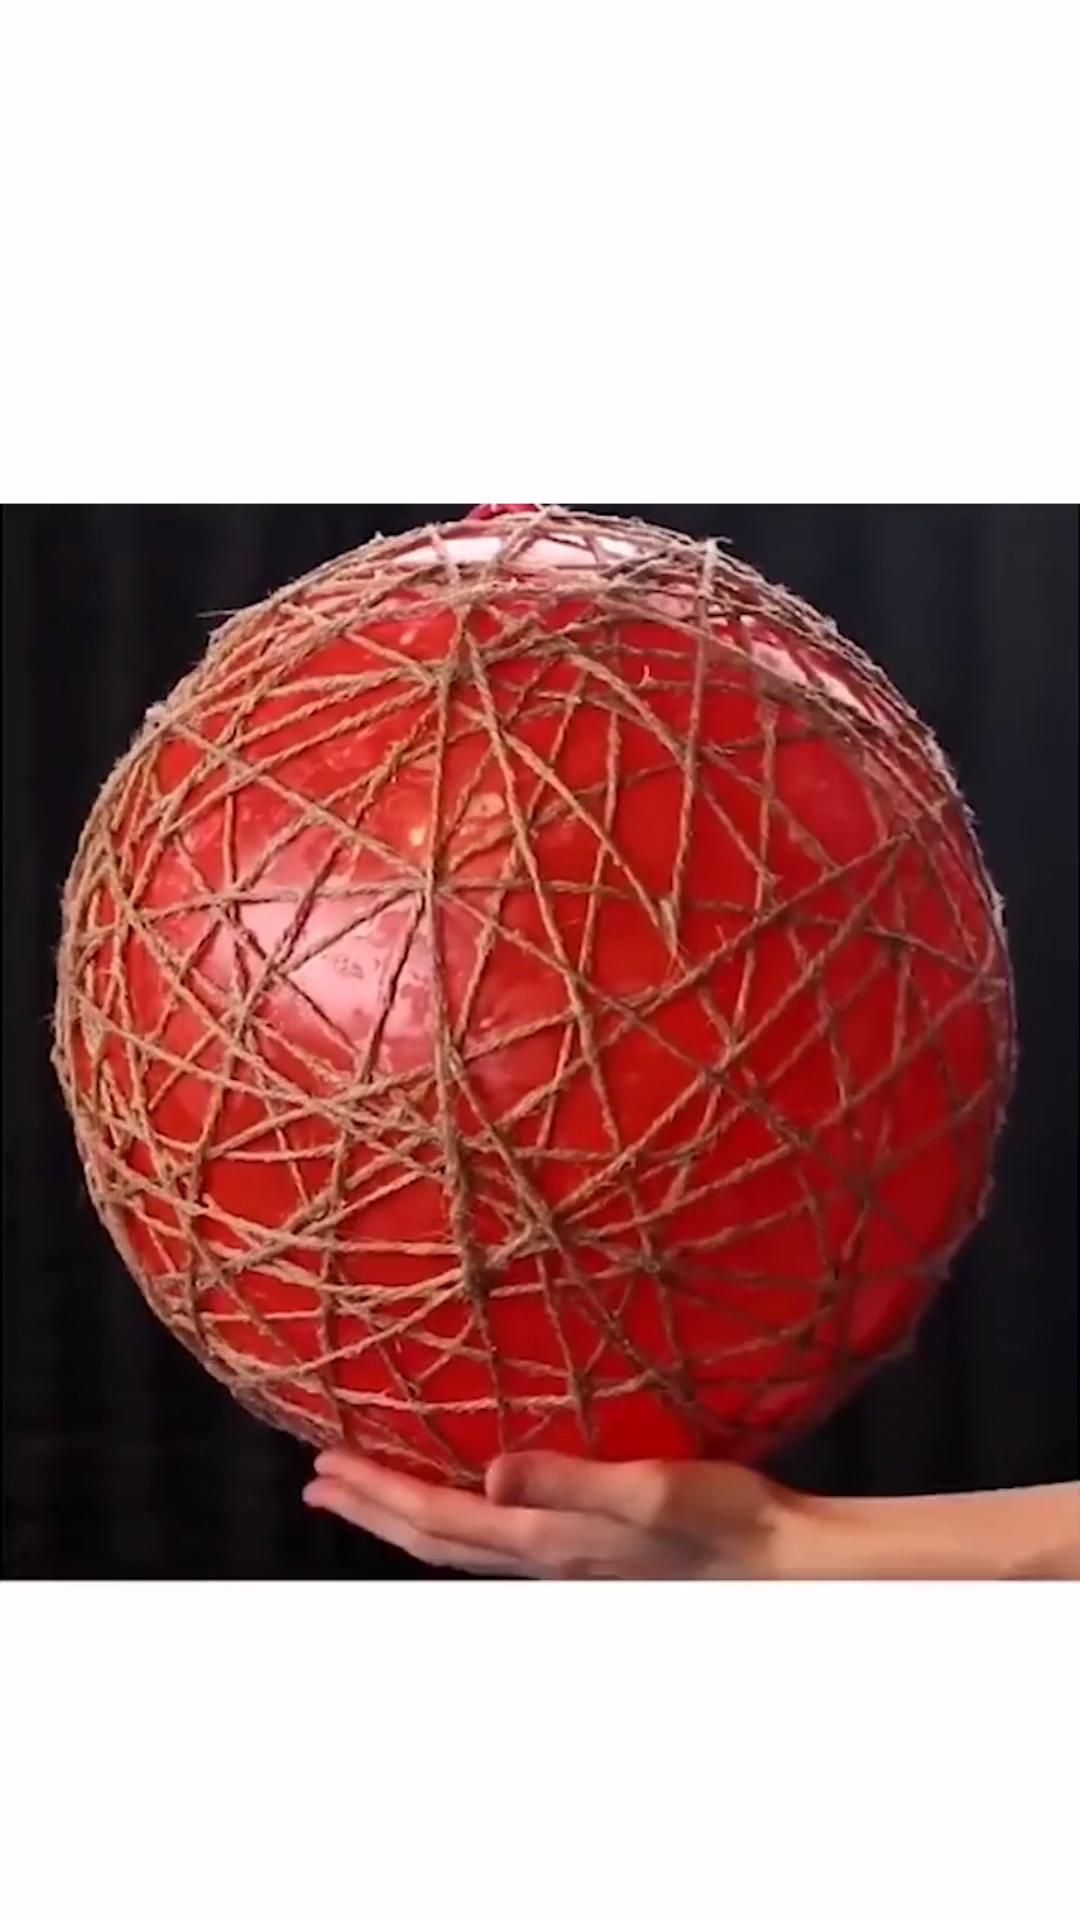 DIY-How to Make a Large Rattan Ball in 3 Steps - Decorative Ball for Home Decor - DIY-How to Make a Large Rattan Ball in 3 Steps - Decorative Ball for Home Decor -   23 diy Videos manualidades ideas